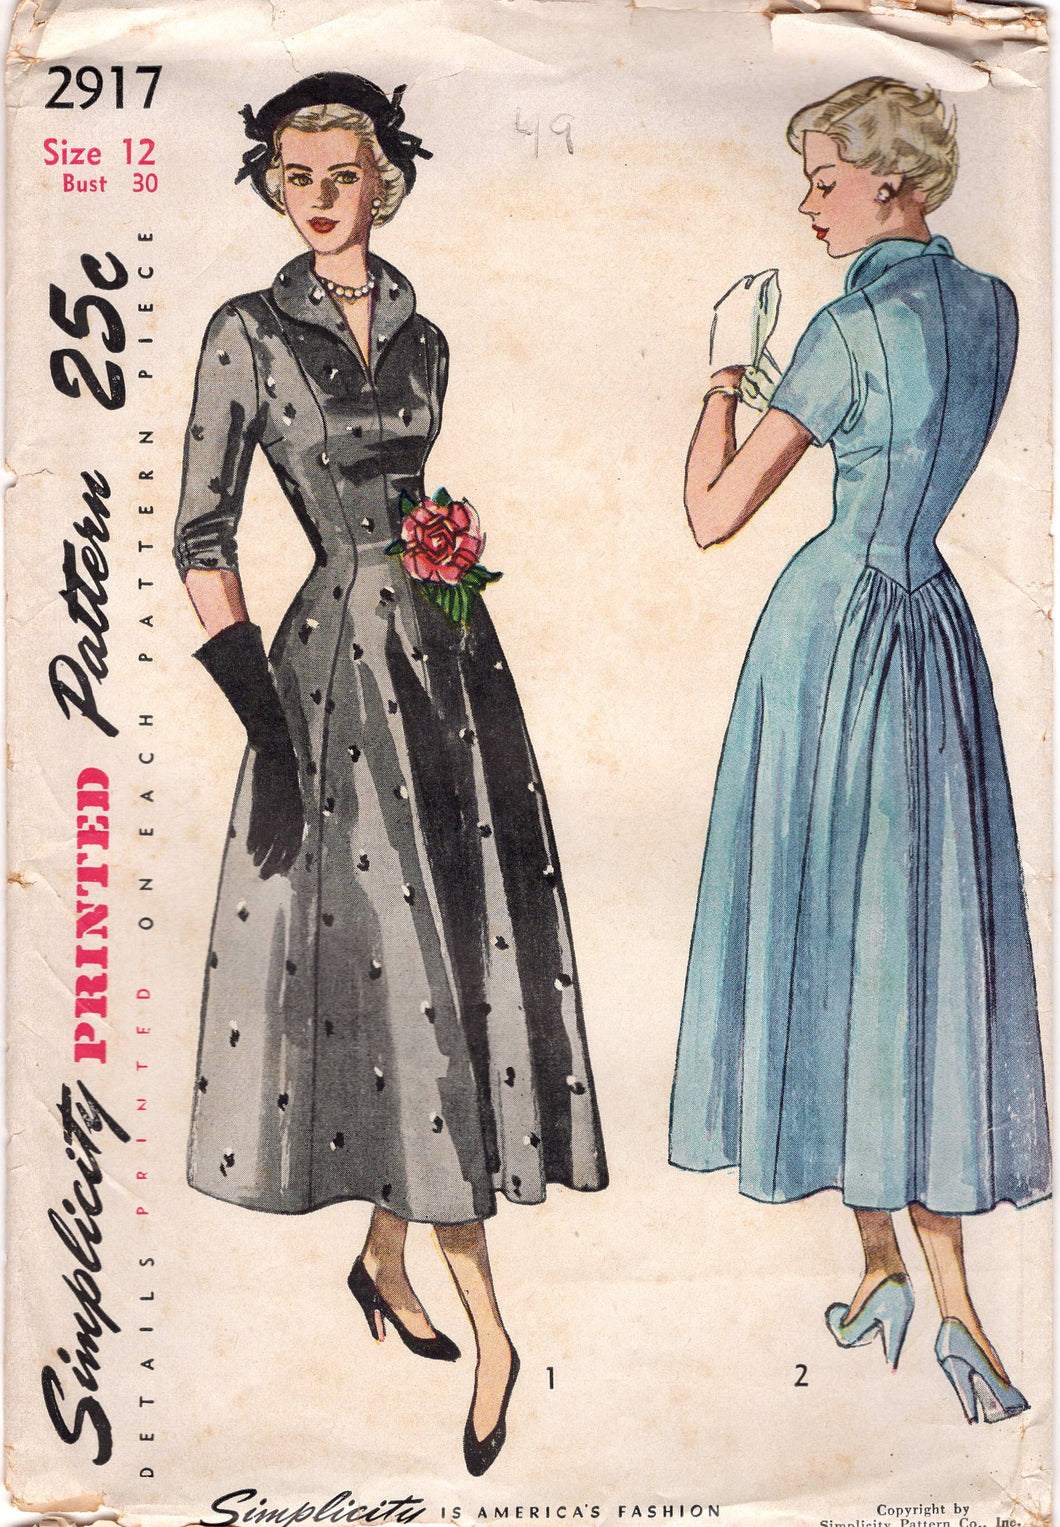 1940's Simplicity Princess Line Dress Pattern with Rolled Collar and Gathered Back Skirt - Bust 30